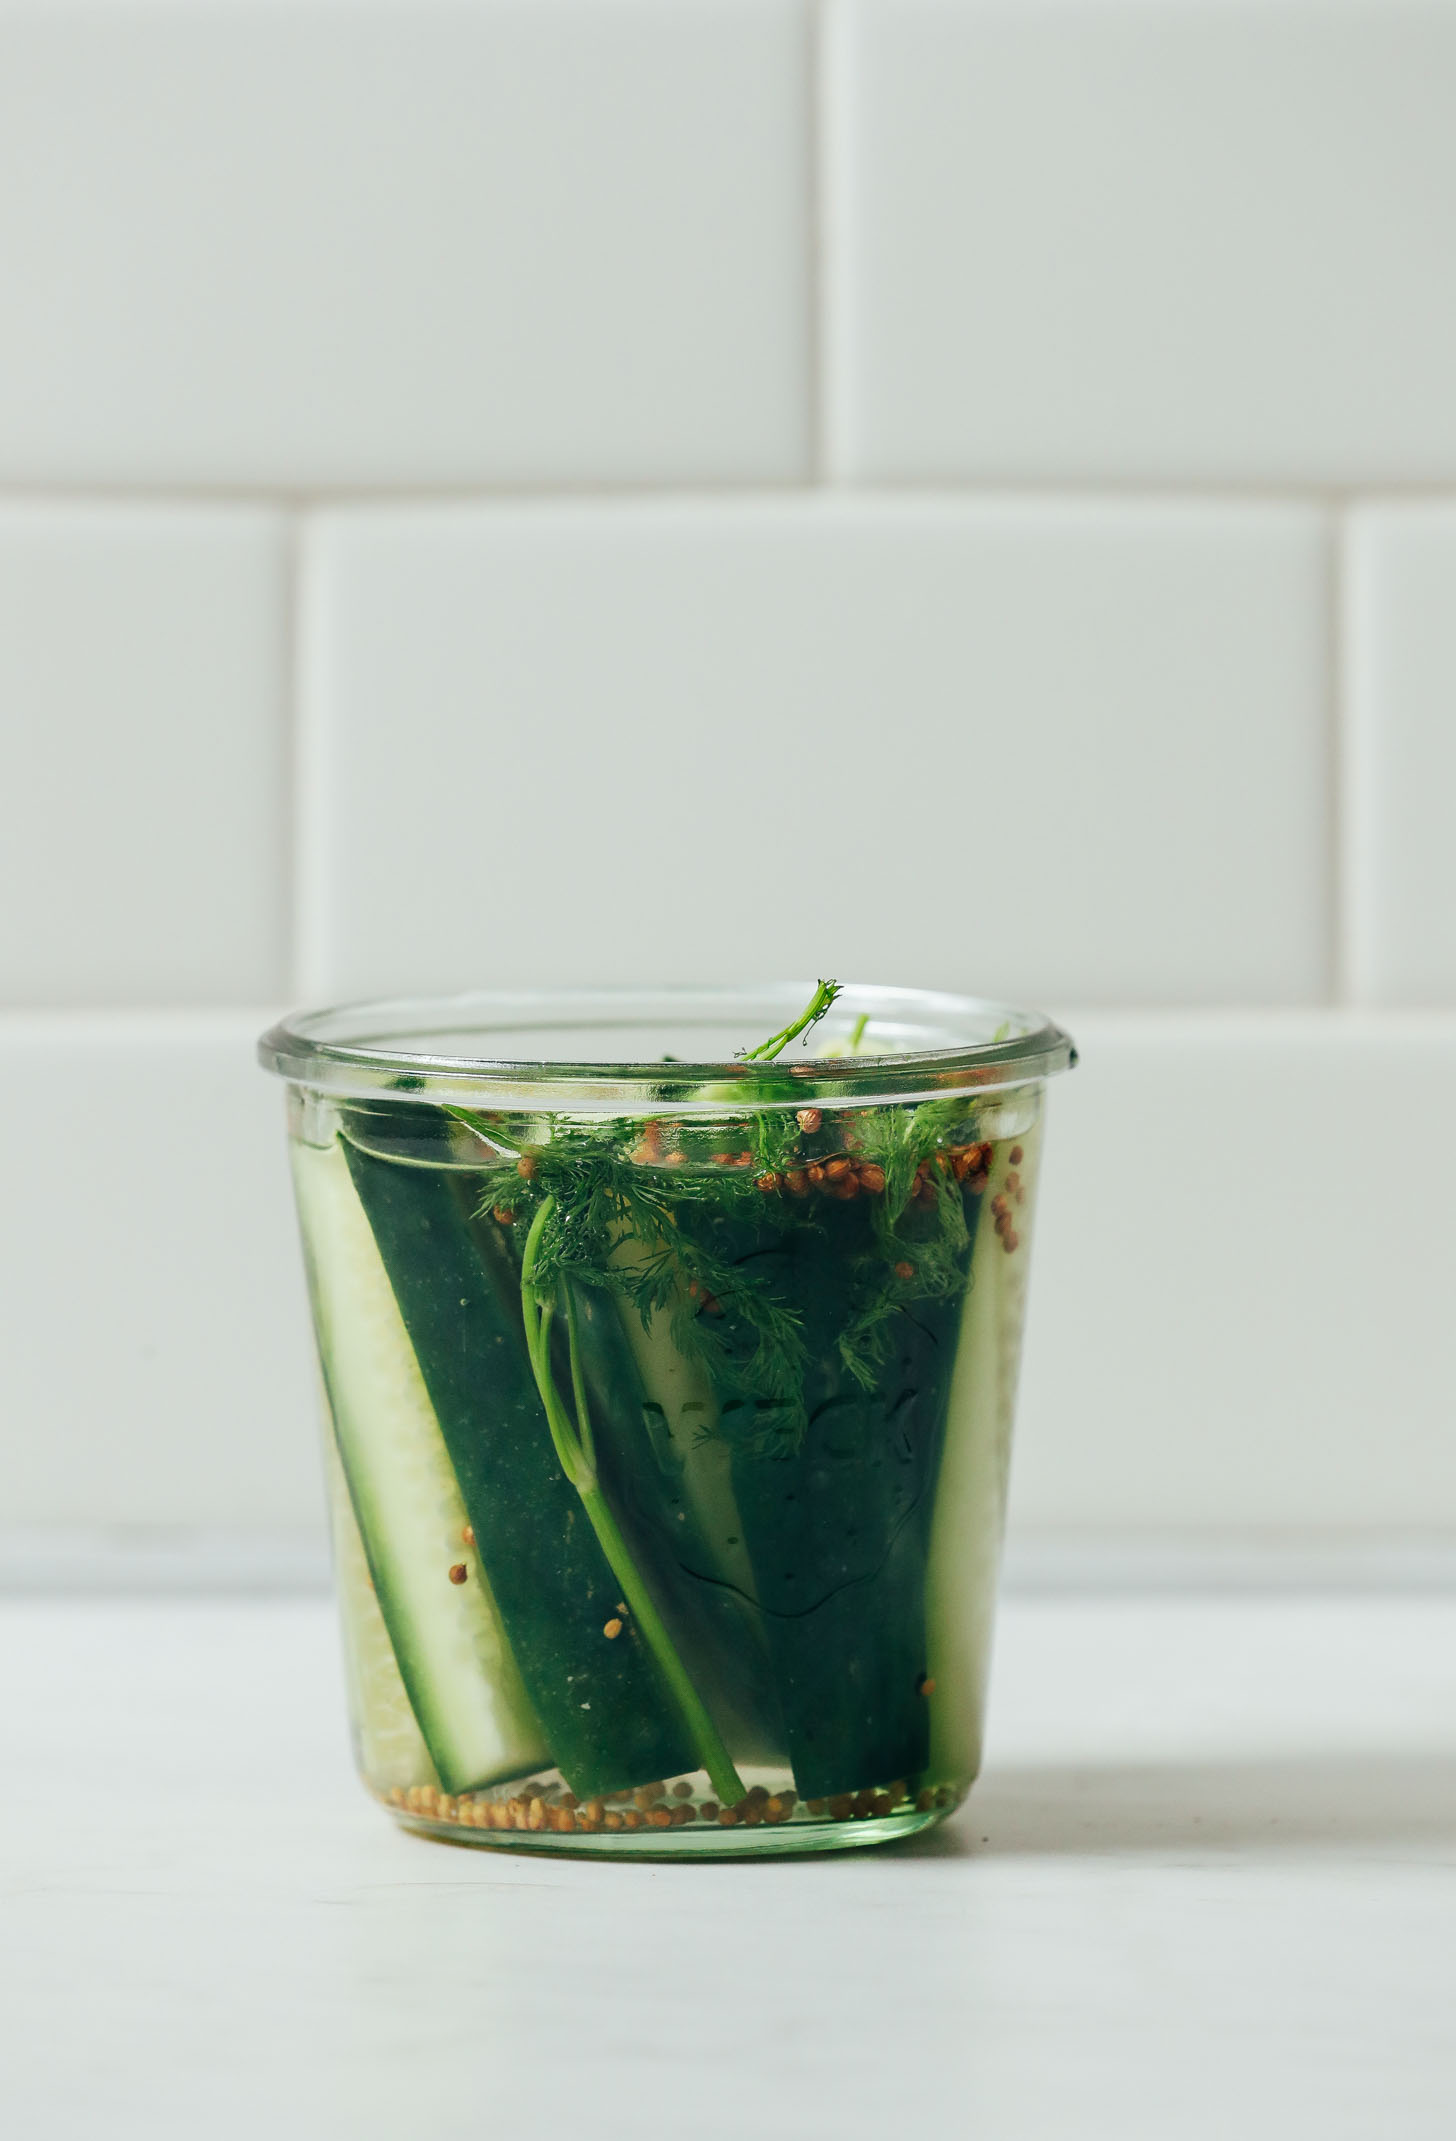 Jar of Quick Pickled Cucumbers made with mustard seeds, dill, and coriander seeds